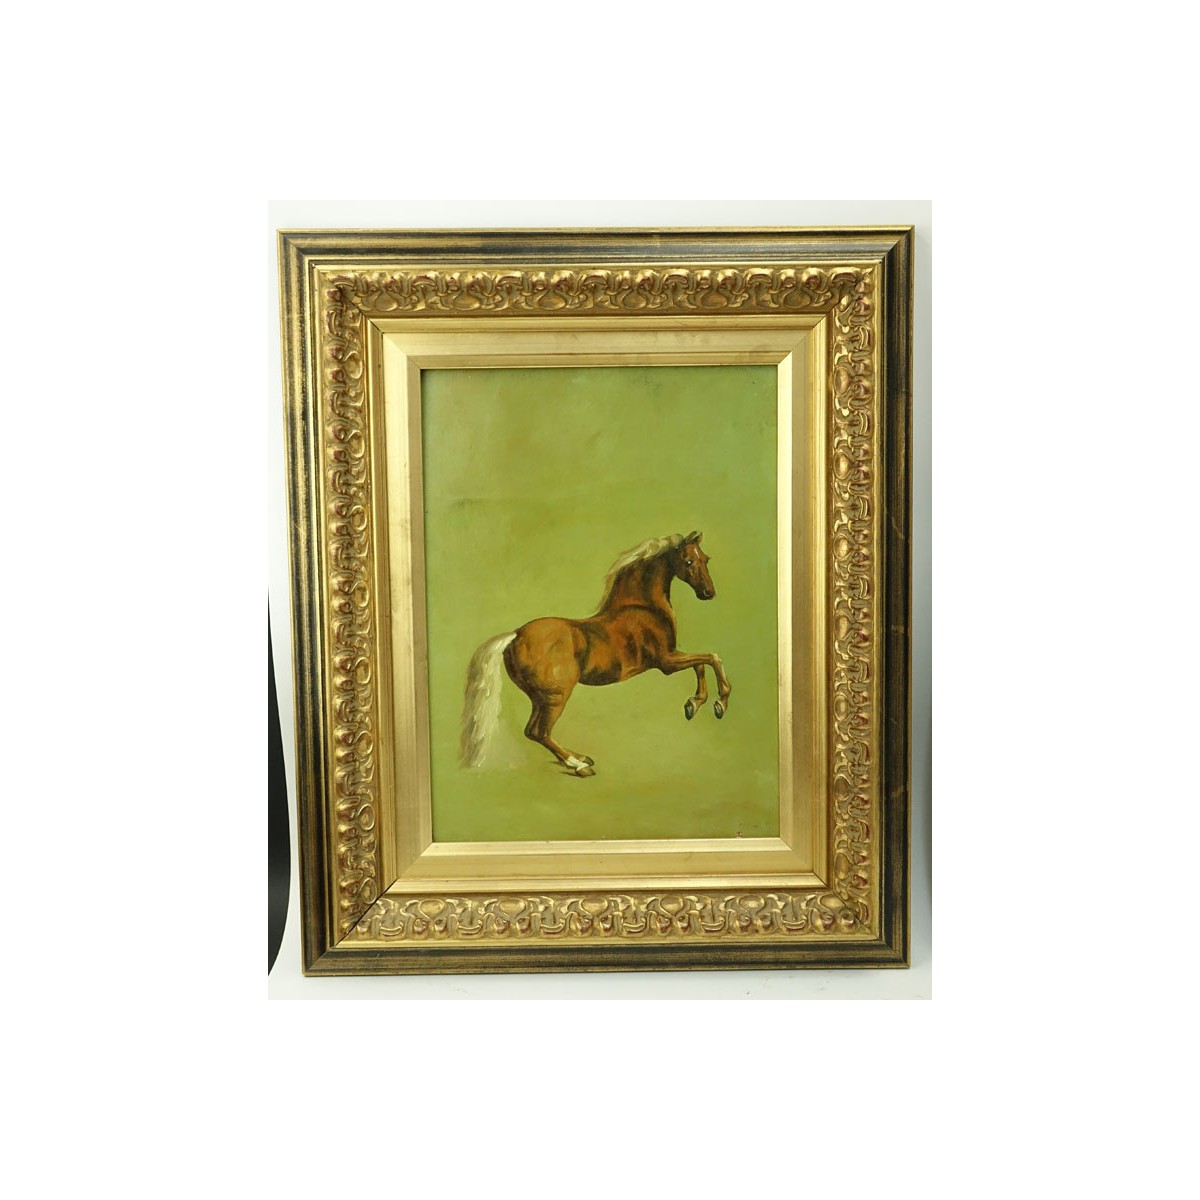 20th Century Oil On Board "Horse". Unsigned. Minor losses. Measures 16" x 12", frame measures 24-3/